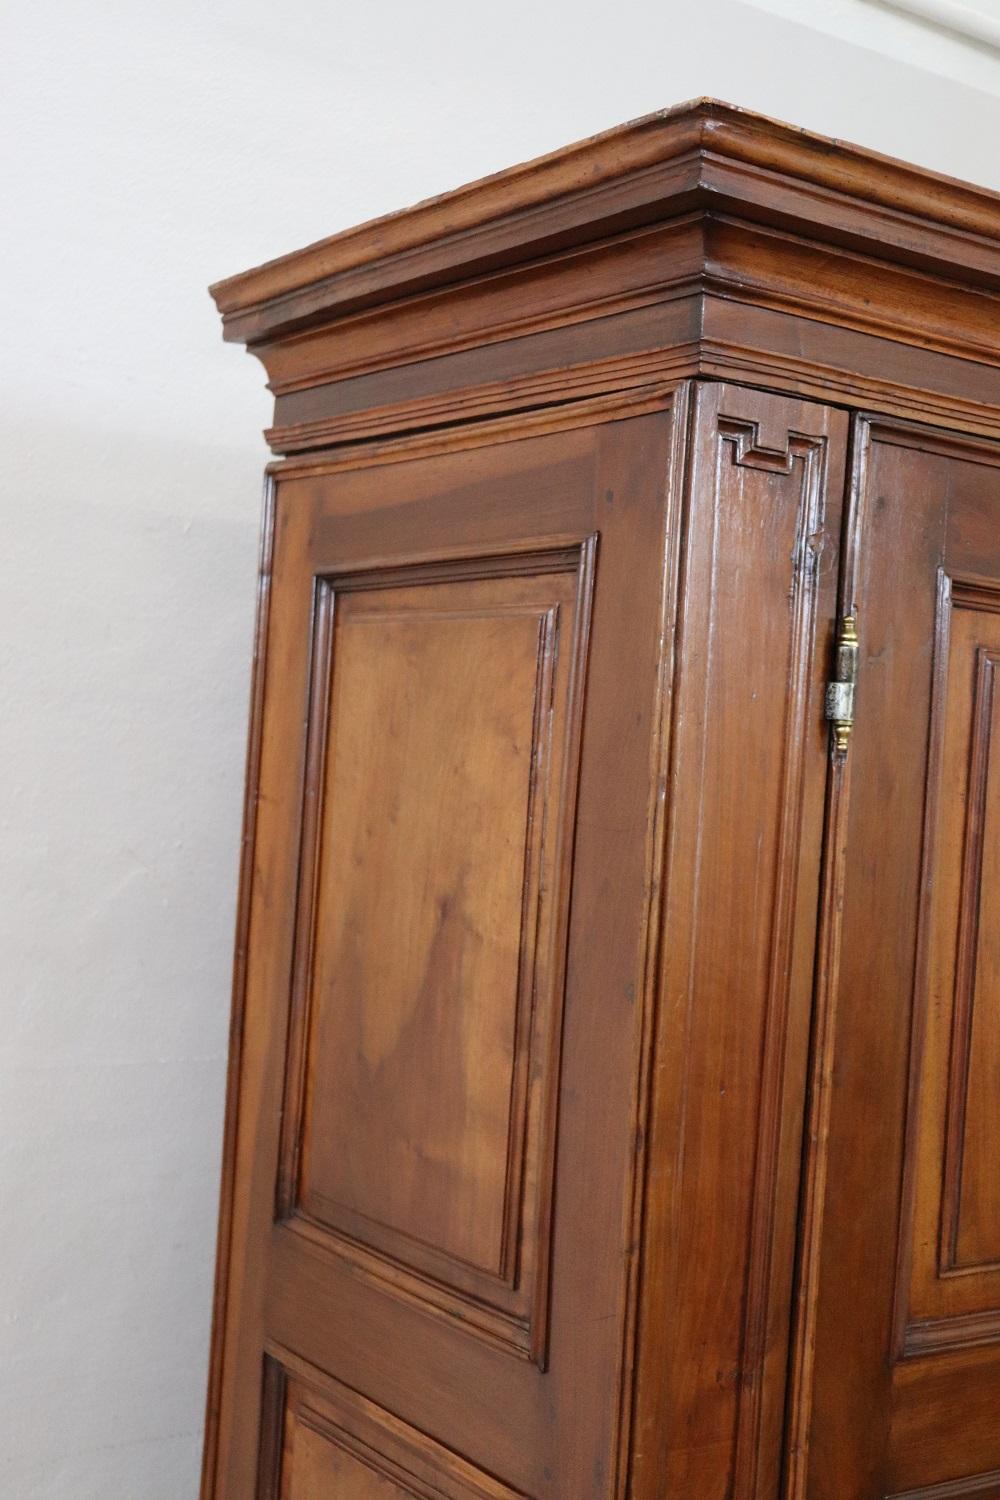 Early 18th Century Louis XIV Solid Walnut Antique Wardrobe, Armoire with Secret 3